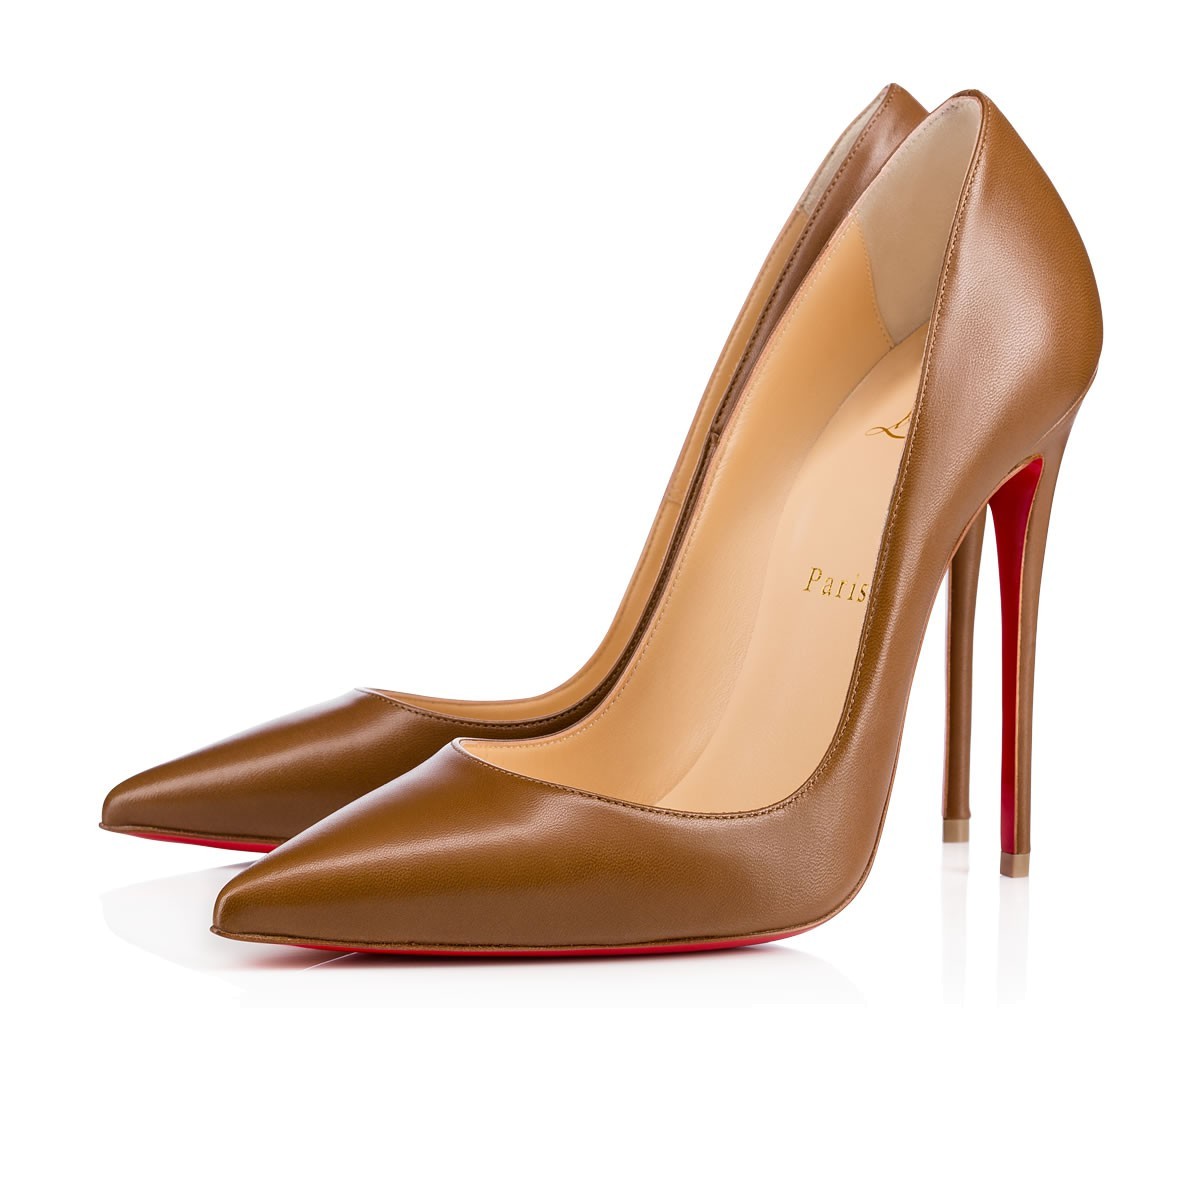 Christian Louboutin So Kate Mm Shoes Post